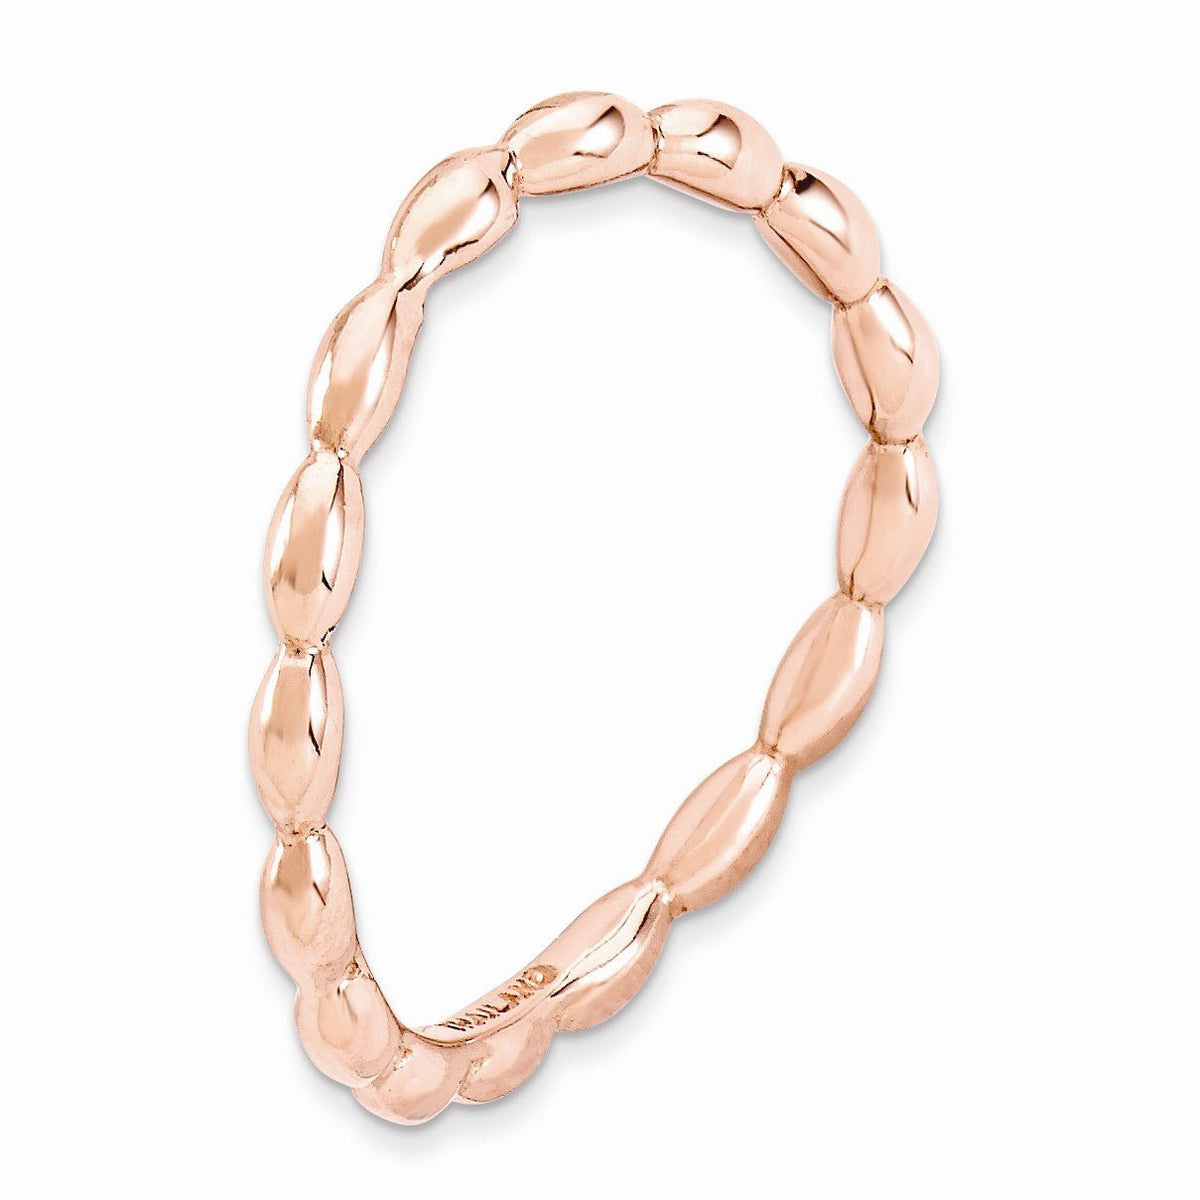 Alternate view of the 1.5mm Stackable 14K Rose Gold Plated Silver Curved Rice Bead Band by The Black Bow Jewelry Co.